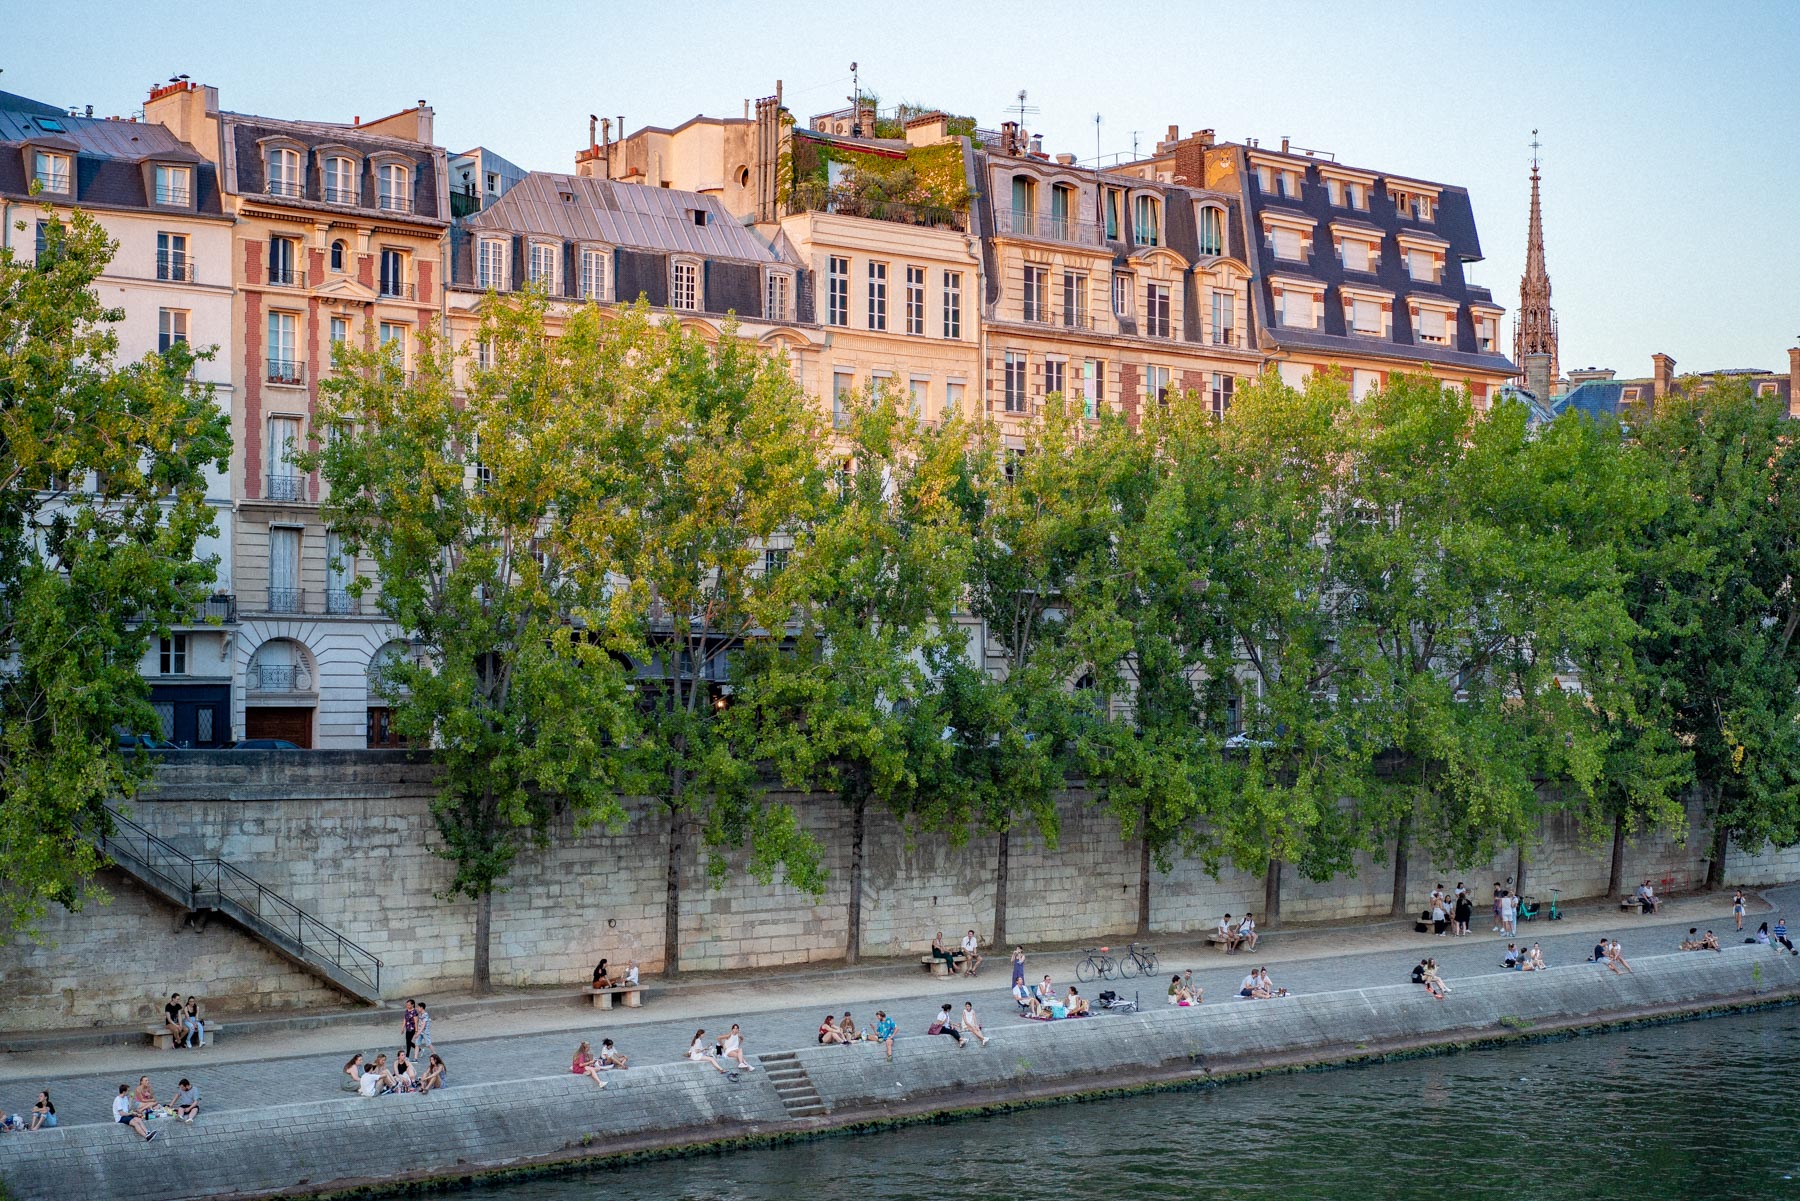 picnic at River Seine in Paris at sunset
Romantic things to do in Paris